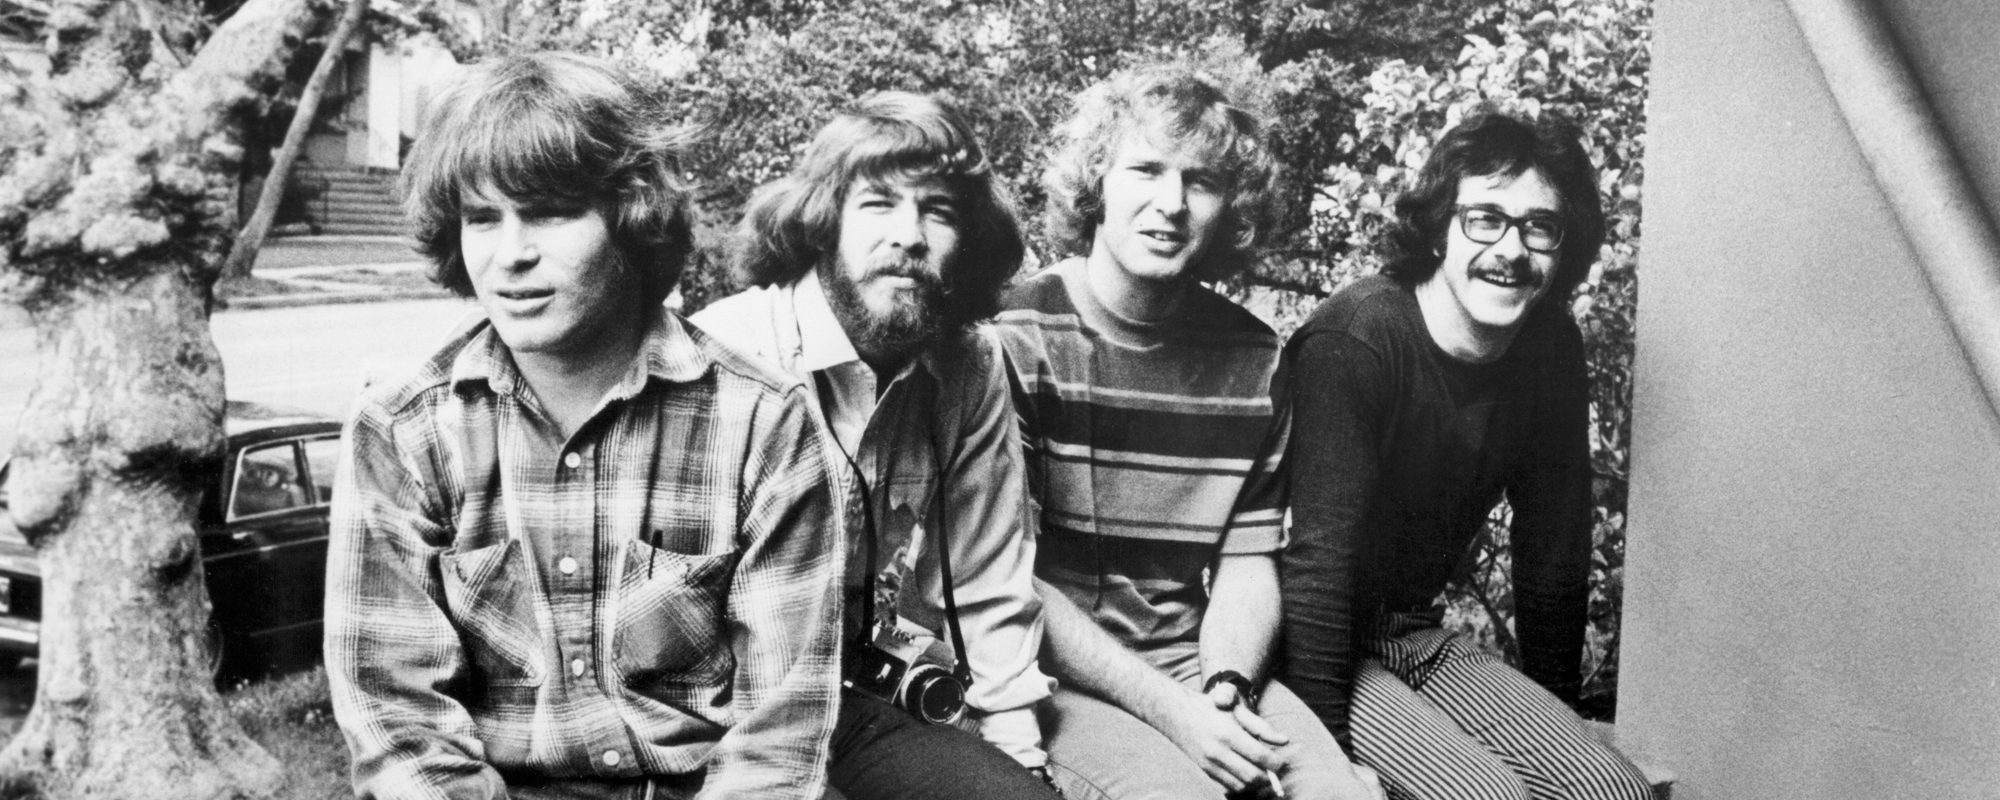 Behind the Band Name: Creedence Clearwater Revival